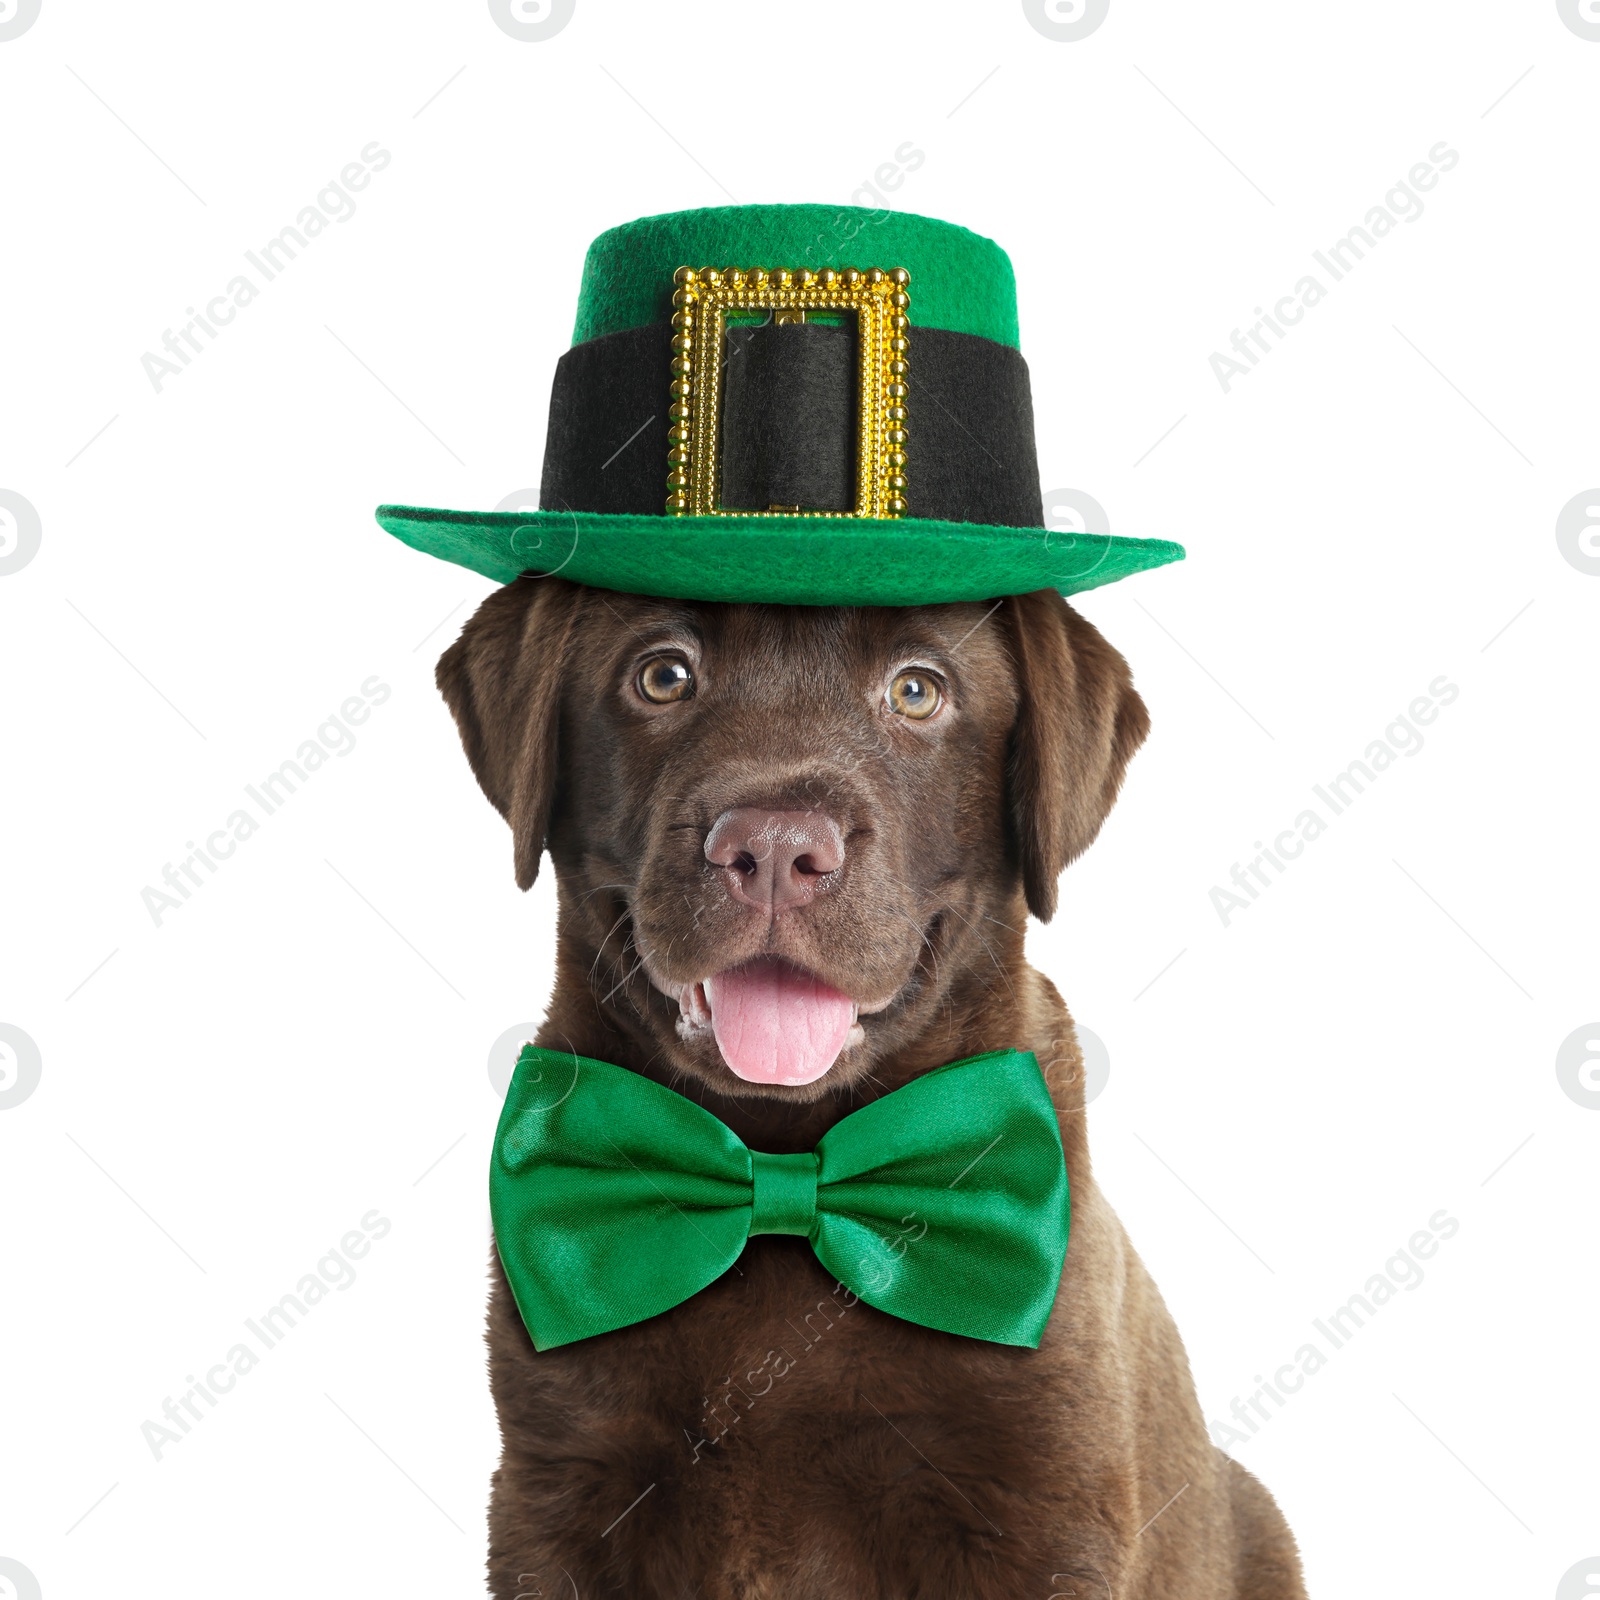 Image of St. Patrick's day celebration. Cute Chocolate Labrador puppy with leprechaun hat and green bow tie isolated on white